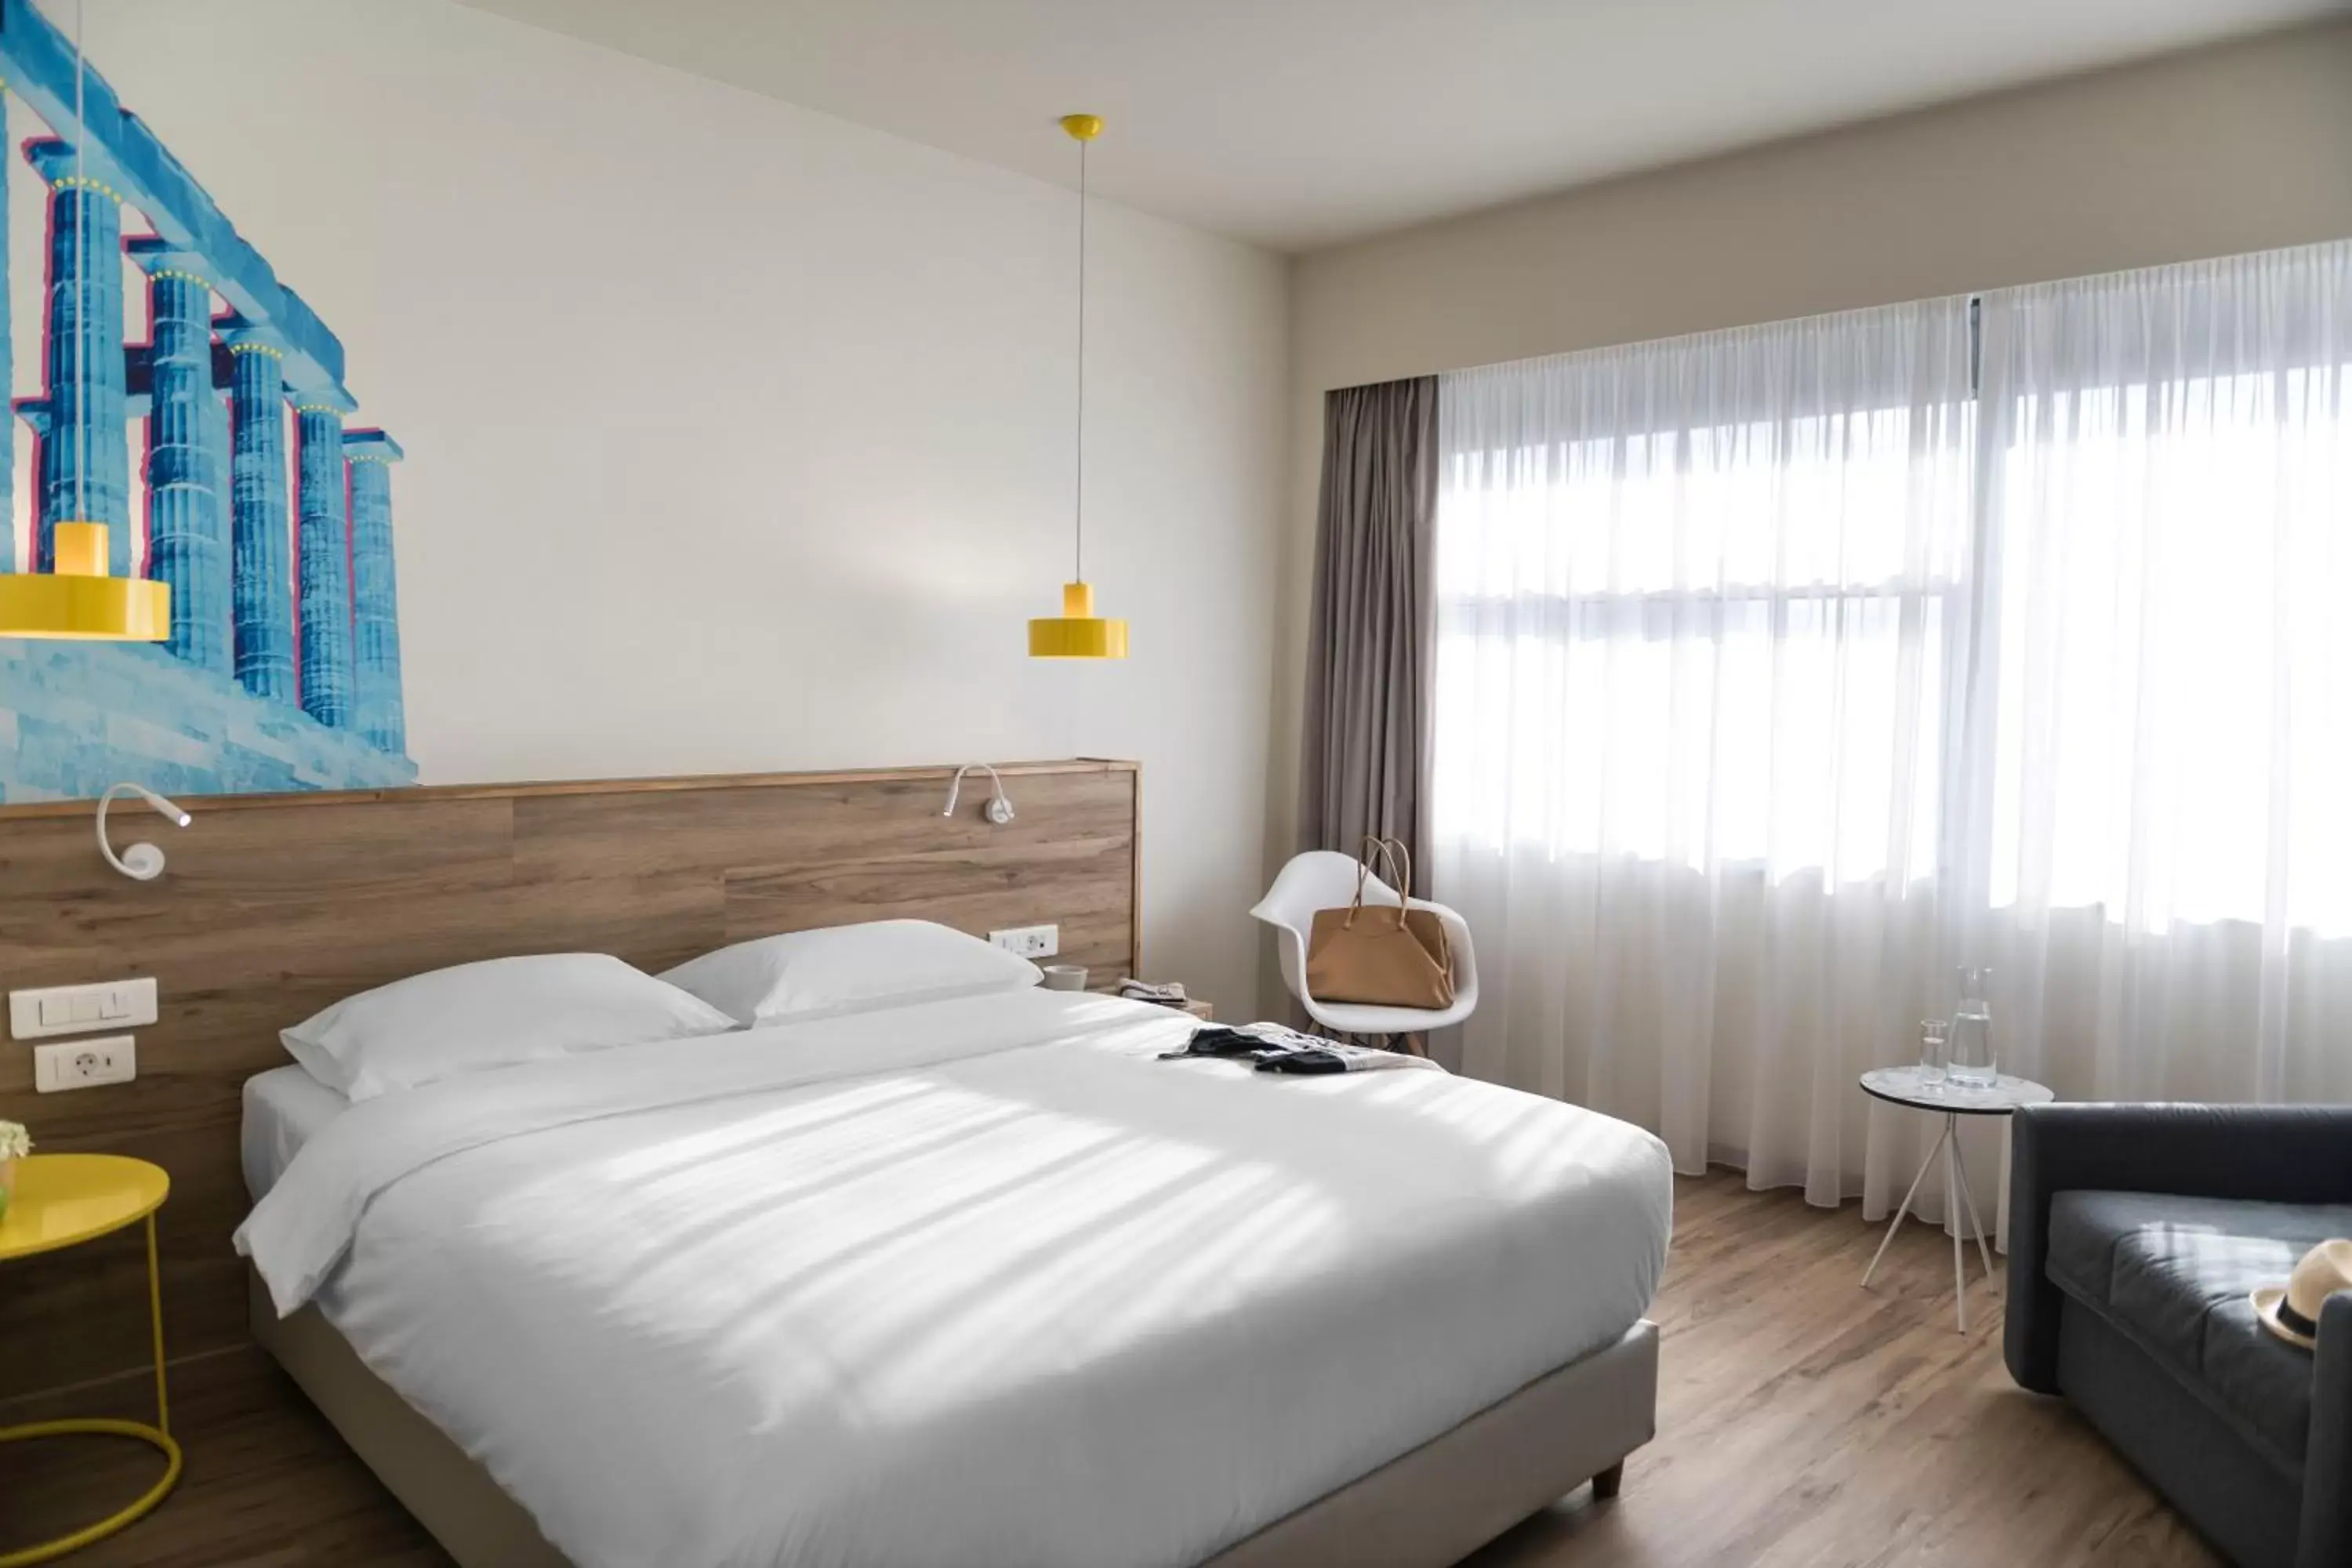 Bed, Room Photo in ibis Styles Athens Routes